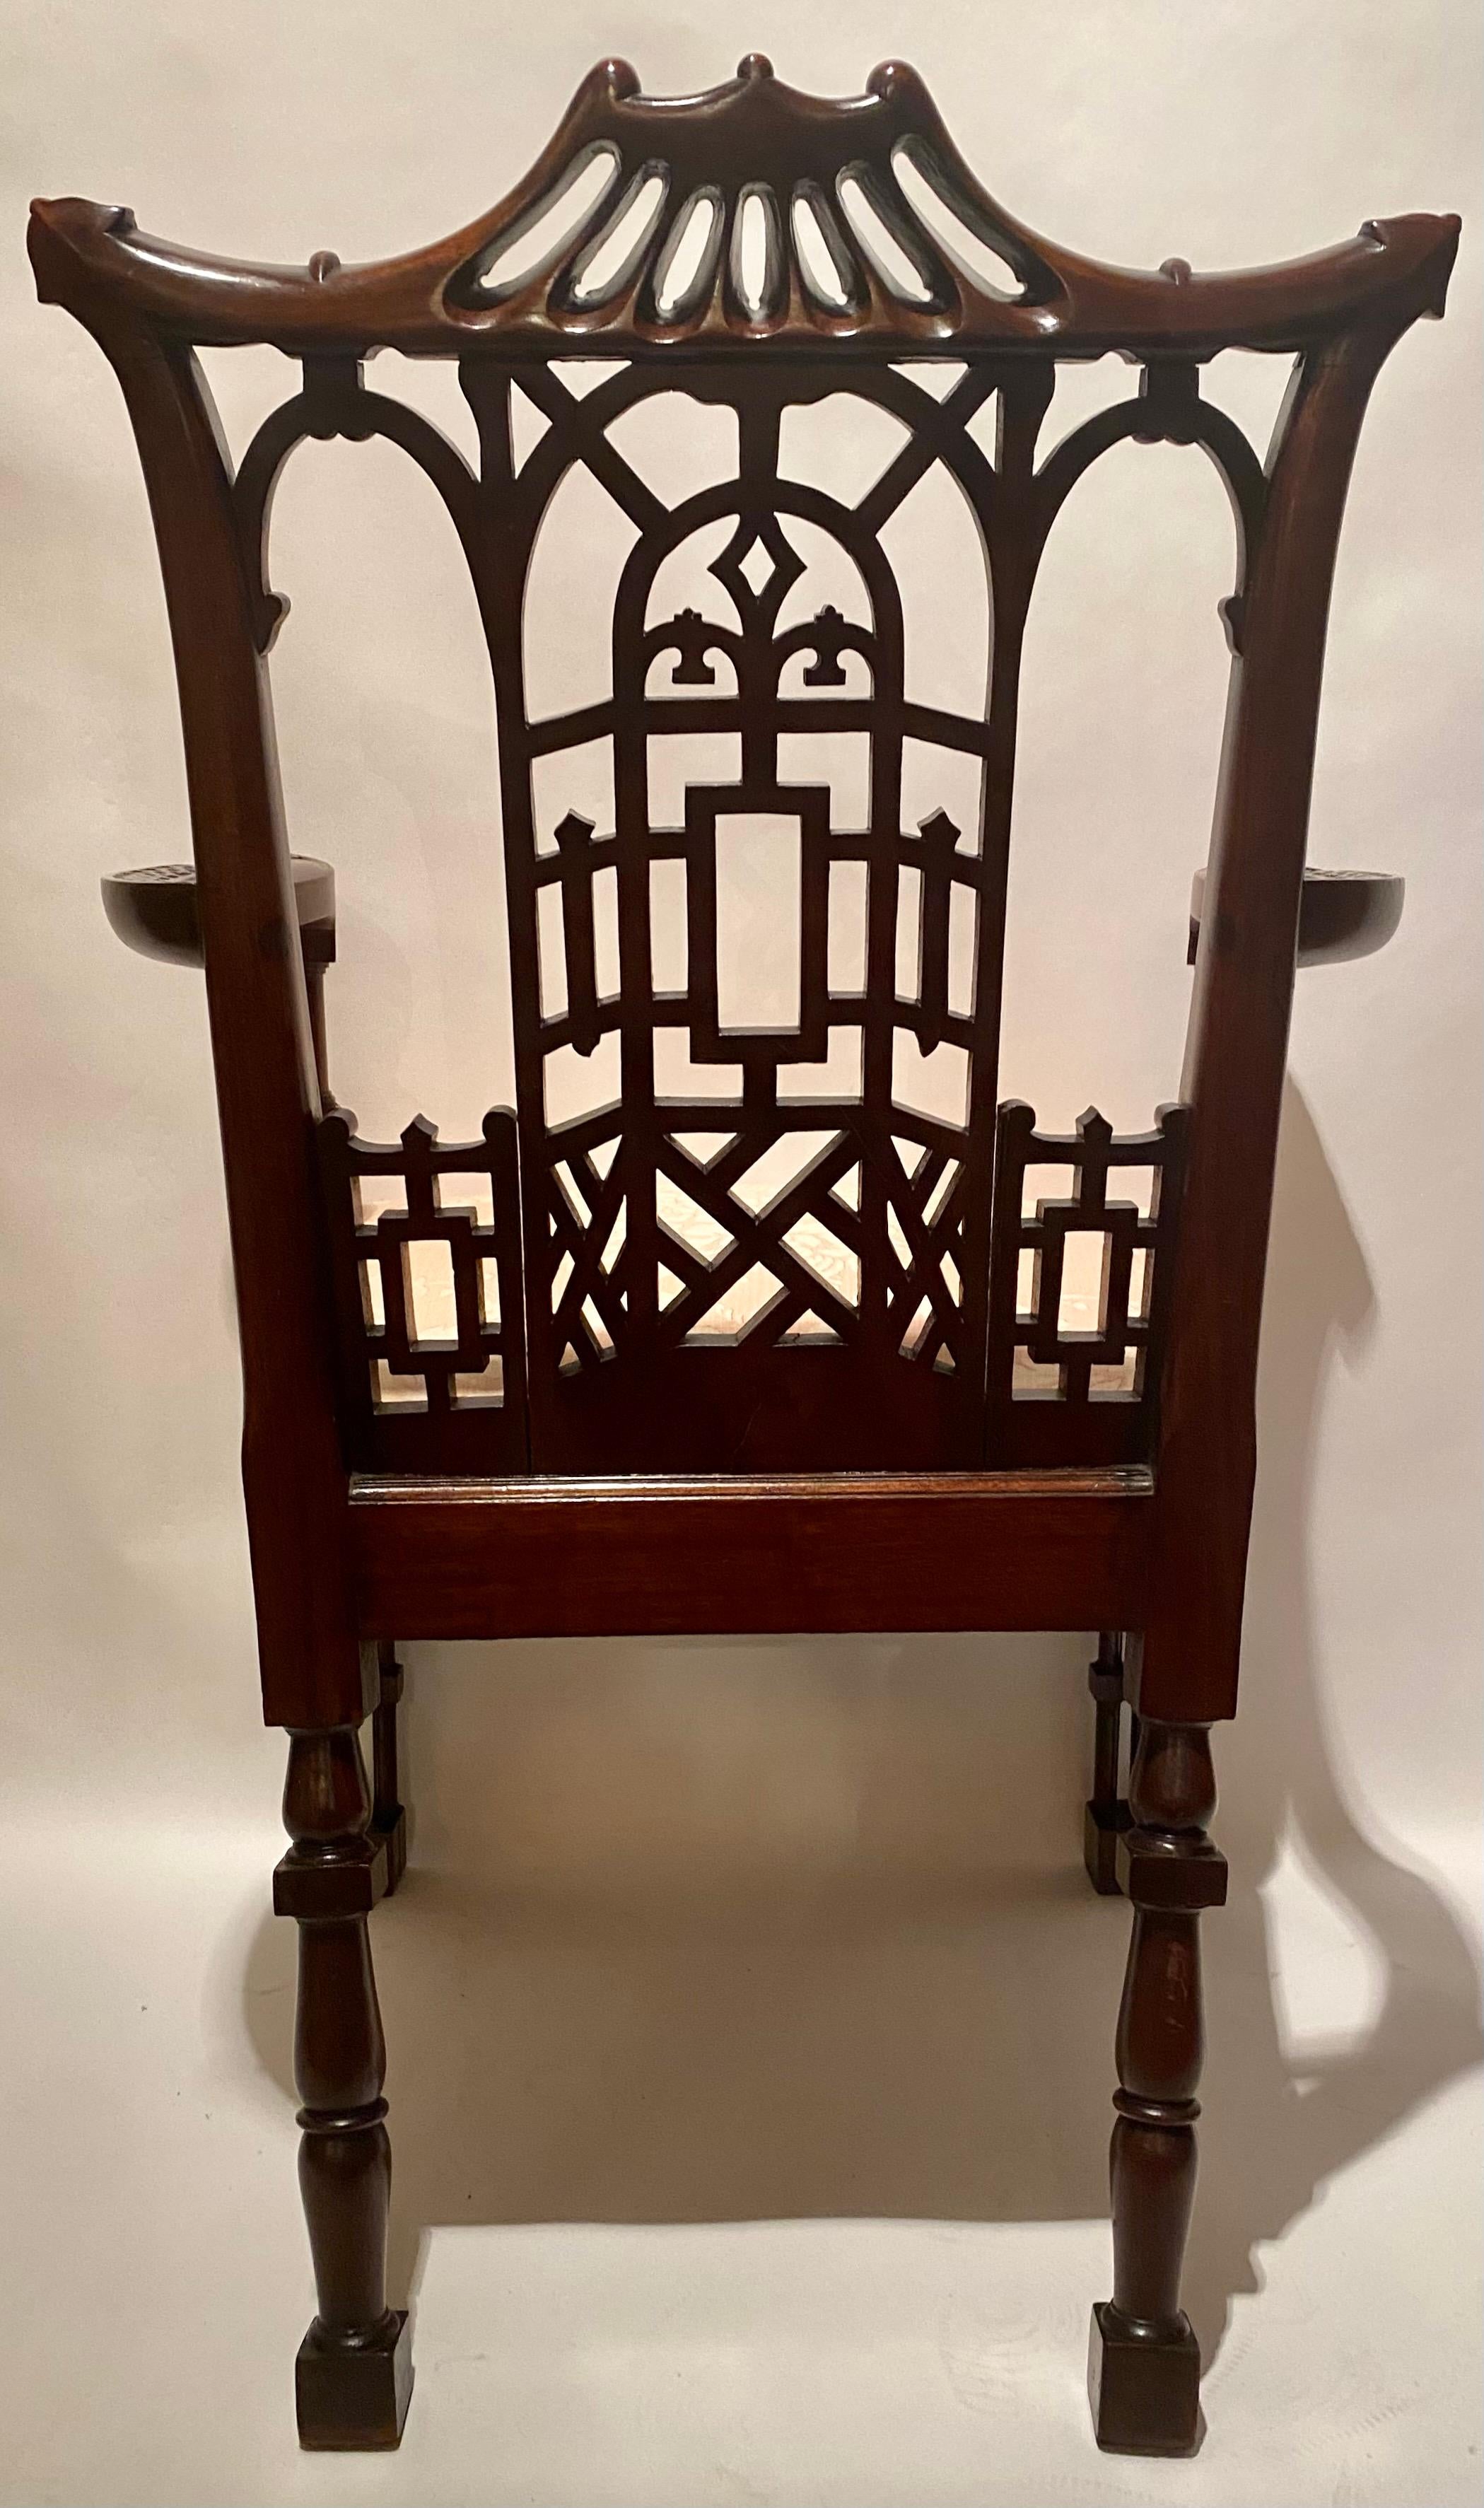 Antique English Chippendale Mahogany Fretwork armchair, Circa 1850-1870. This chair is of magnificent quality.